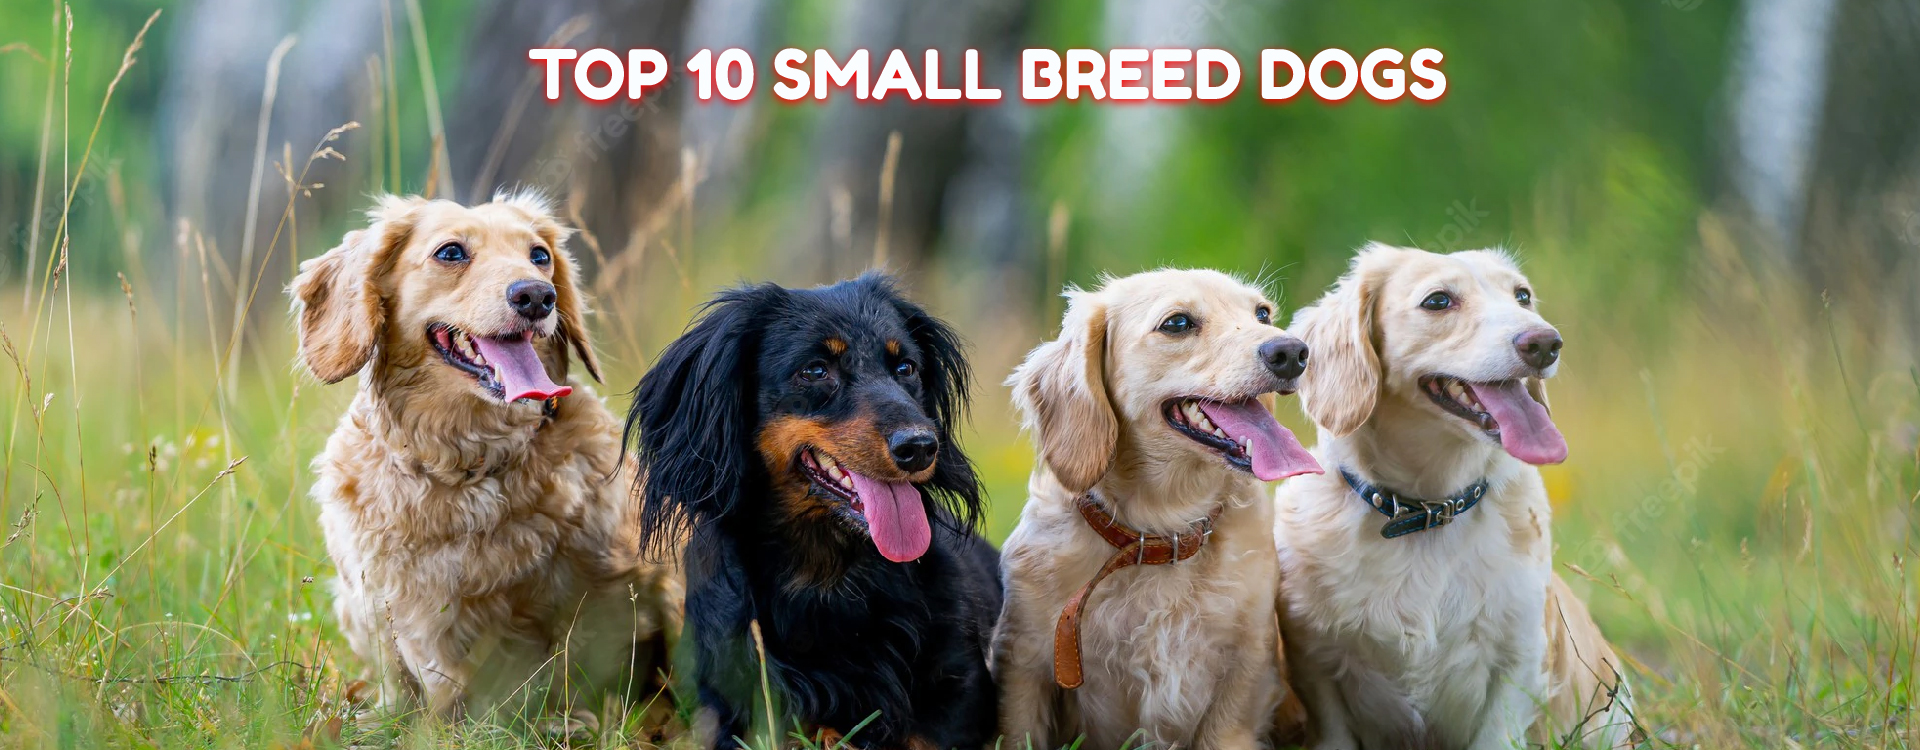 Top 10 Small Breed Dogs Nappets India